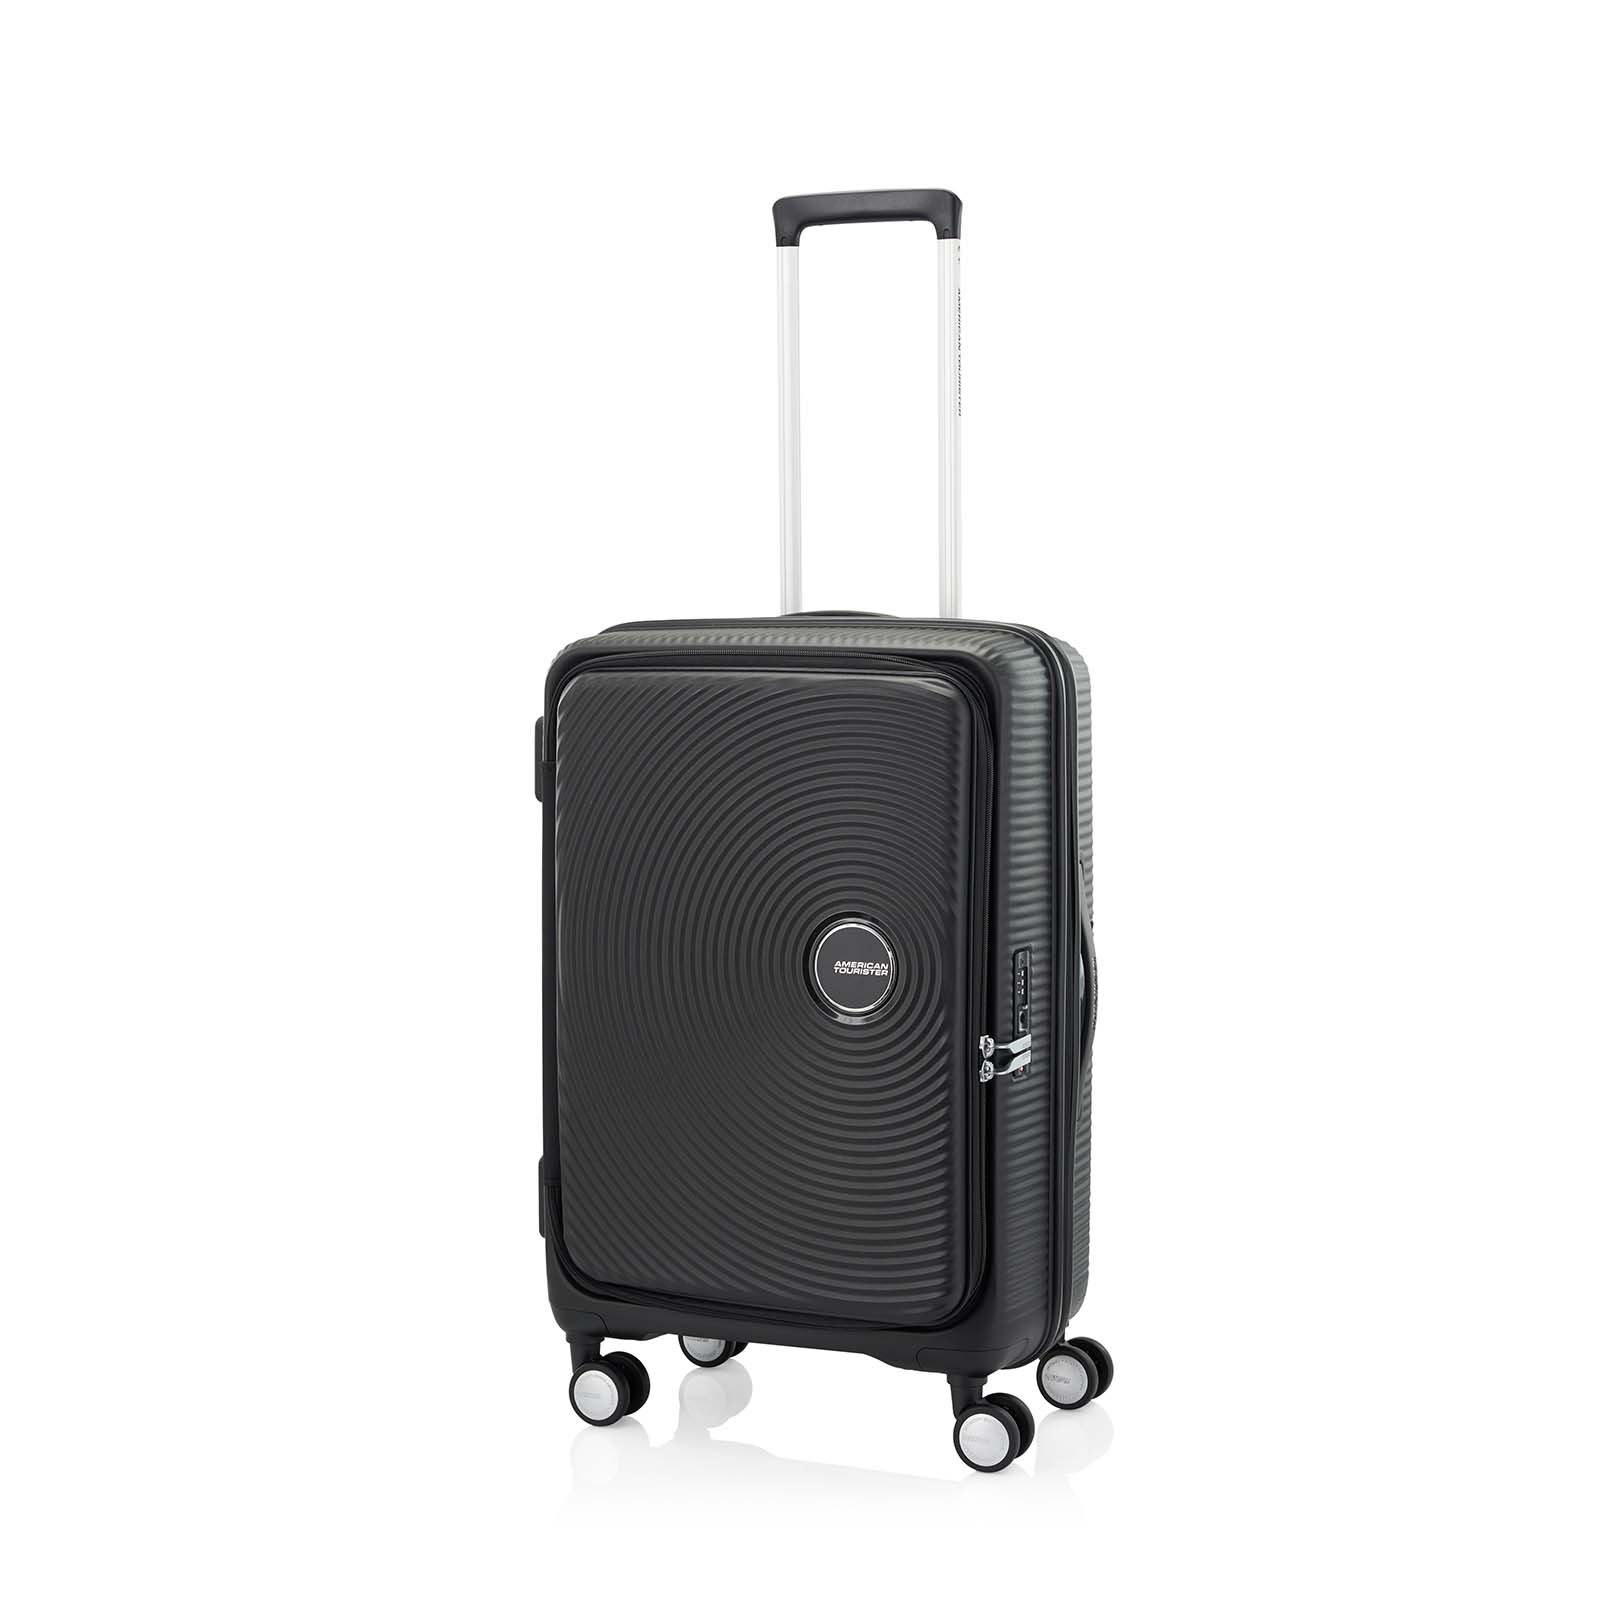 American-Tourister-Curio-Book-Opening-68cm-Suitcase-Black-Front-Angle